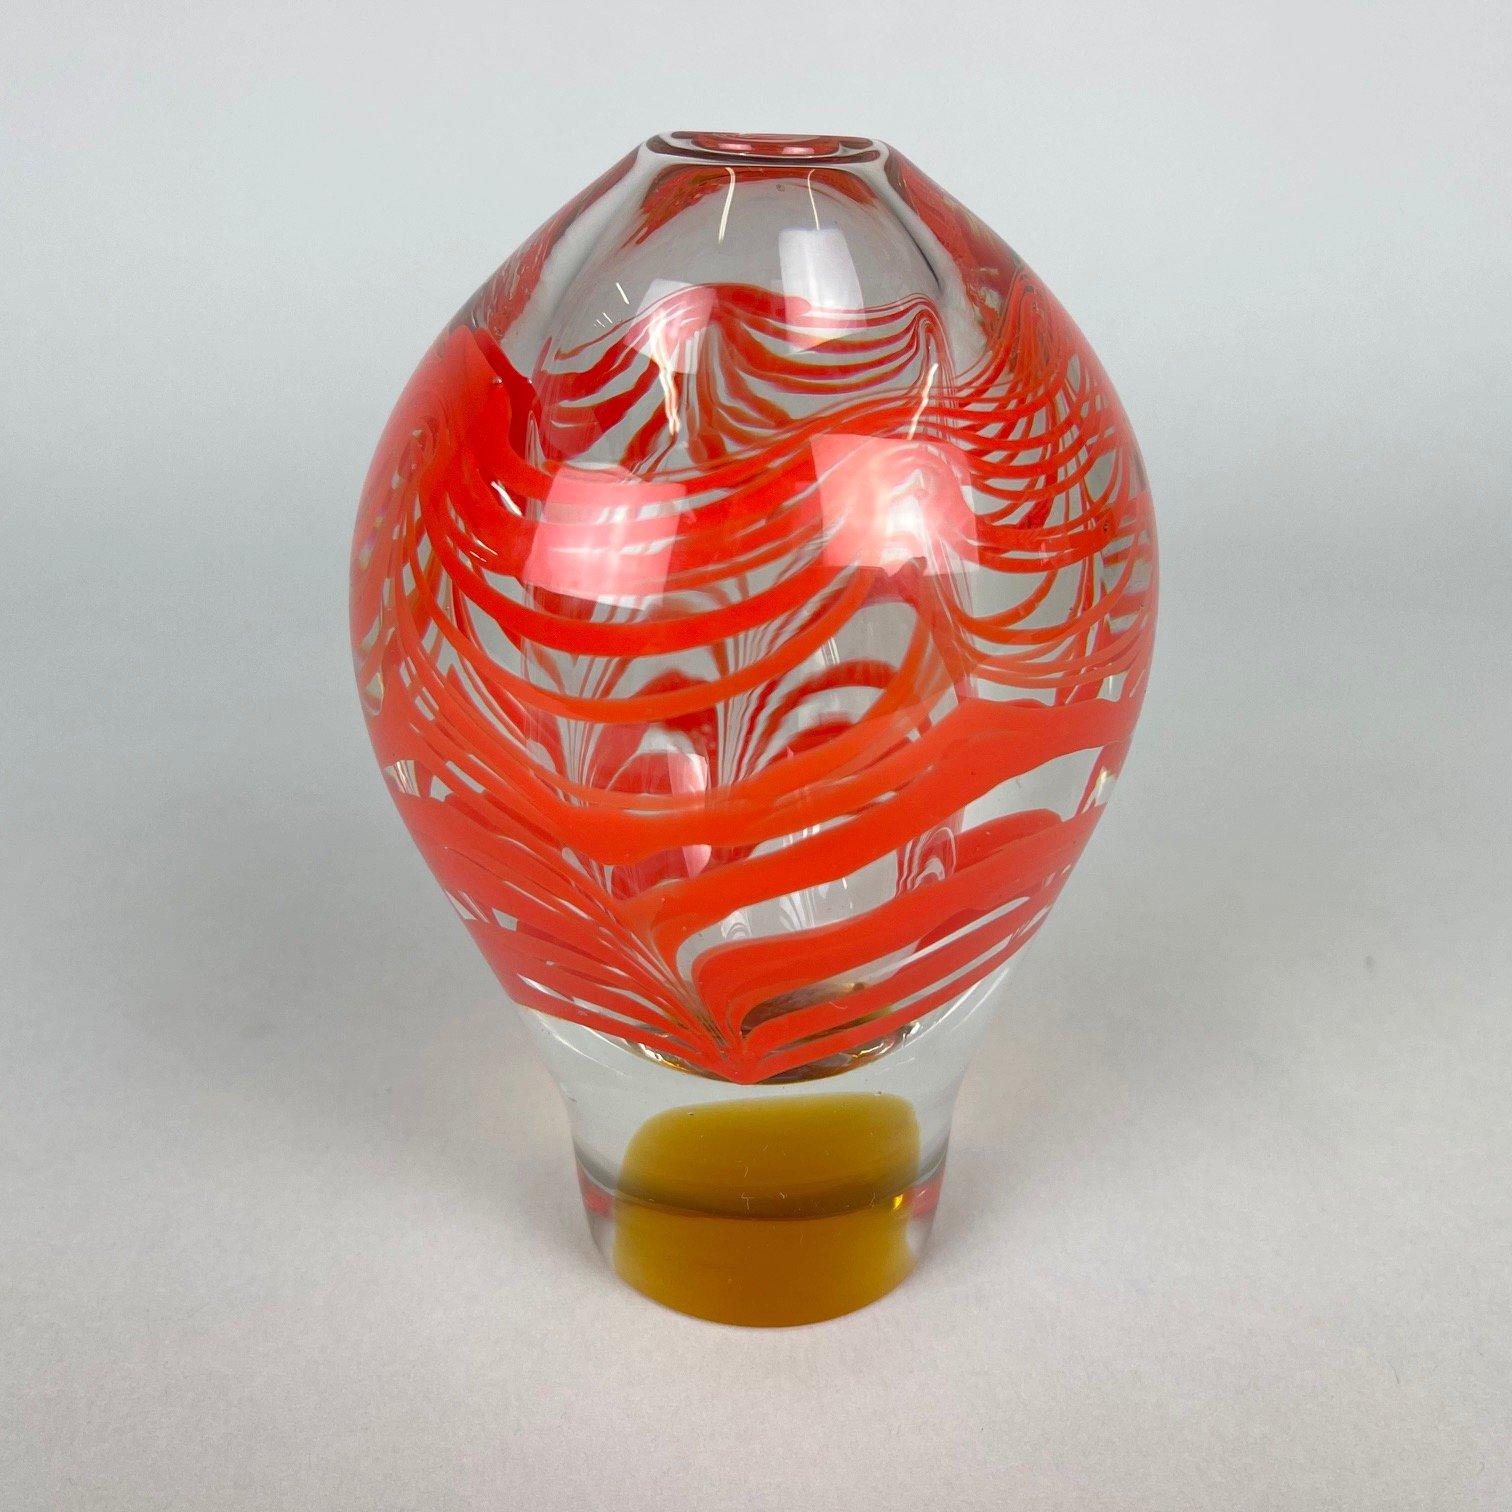 The vase was made in the second half of the 20th century, more precisely in the 1970's, according to the design of Ivo Rozsypal (*1942). The elaboration of the author's design was carried out by the Exbor plant, Borské sklo n.p. Nový Bor.